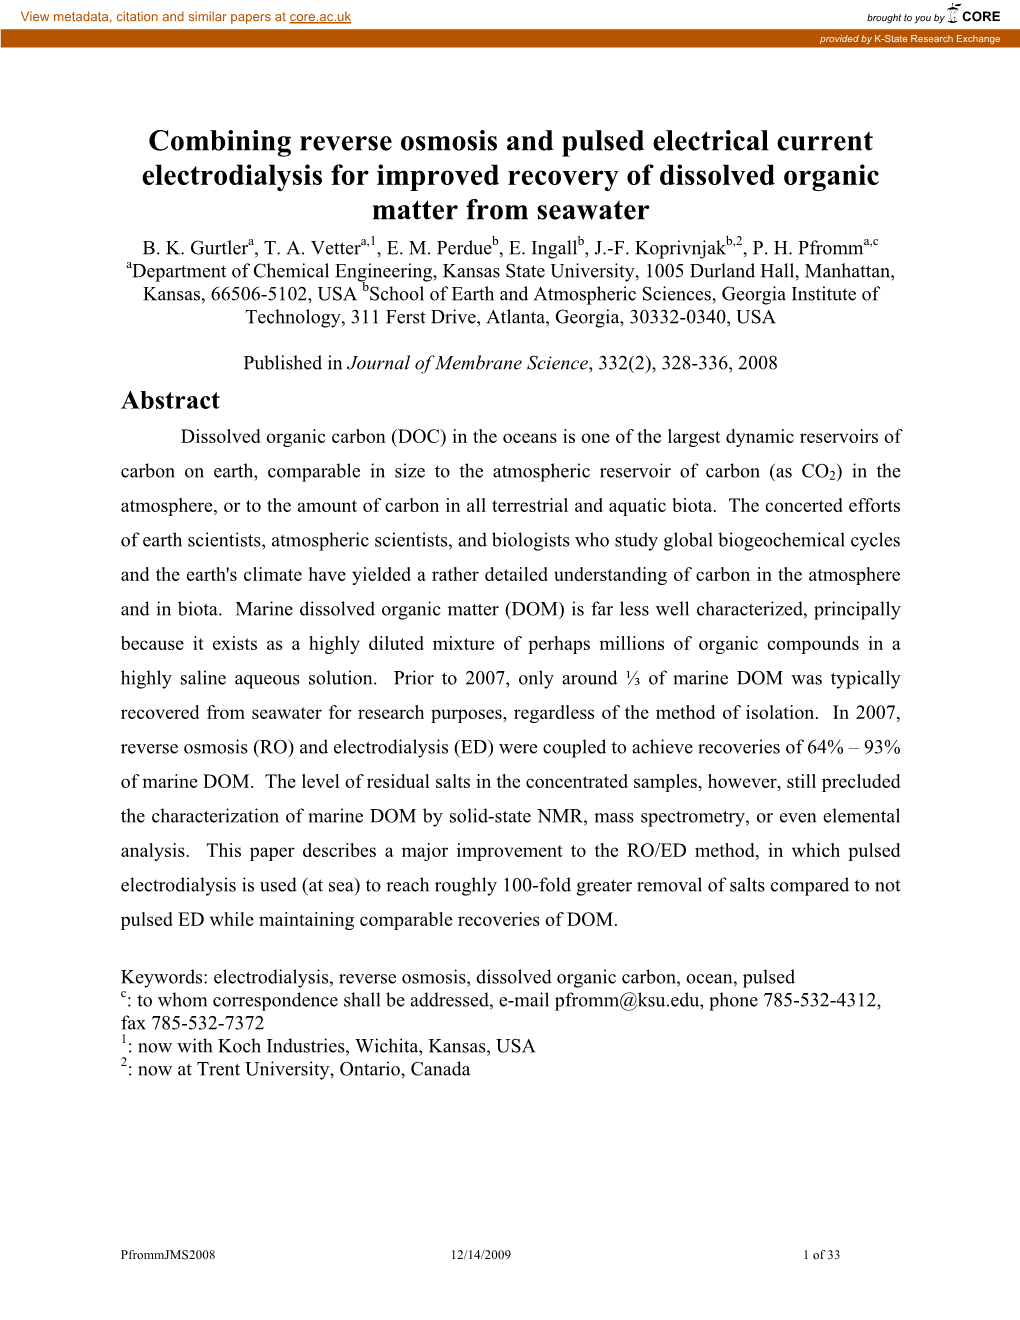 Combining Reverse Osmosis and Pulsed Electrical Current Electrodialysis for Improved Recovery of Dissolved Organic Matter from Seawater B